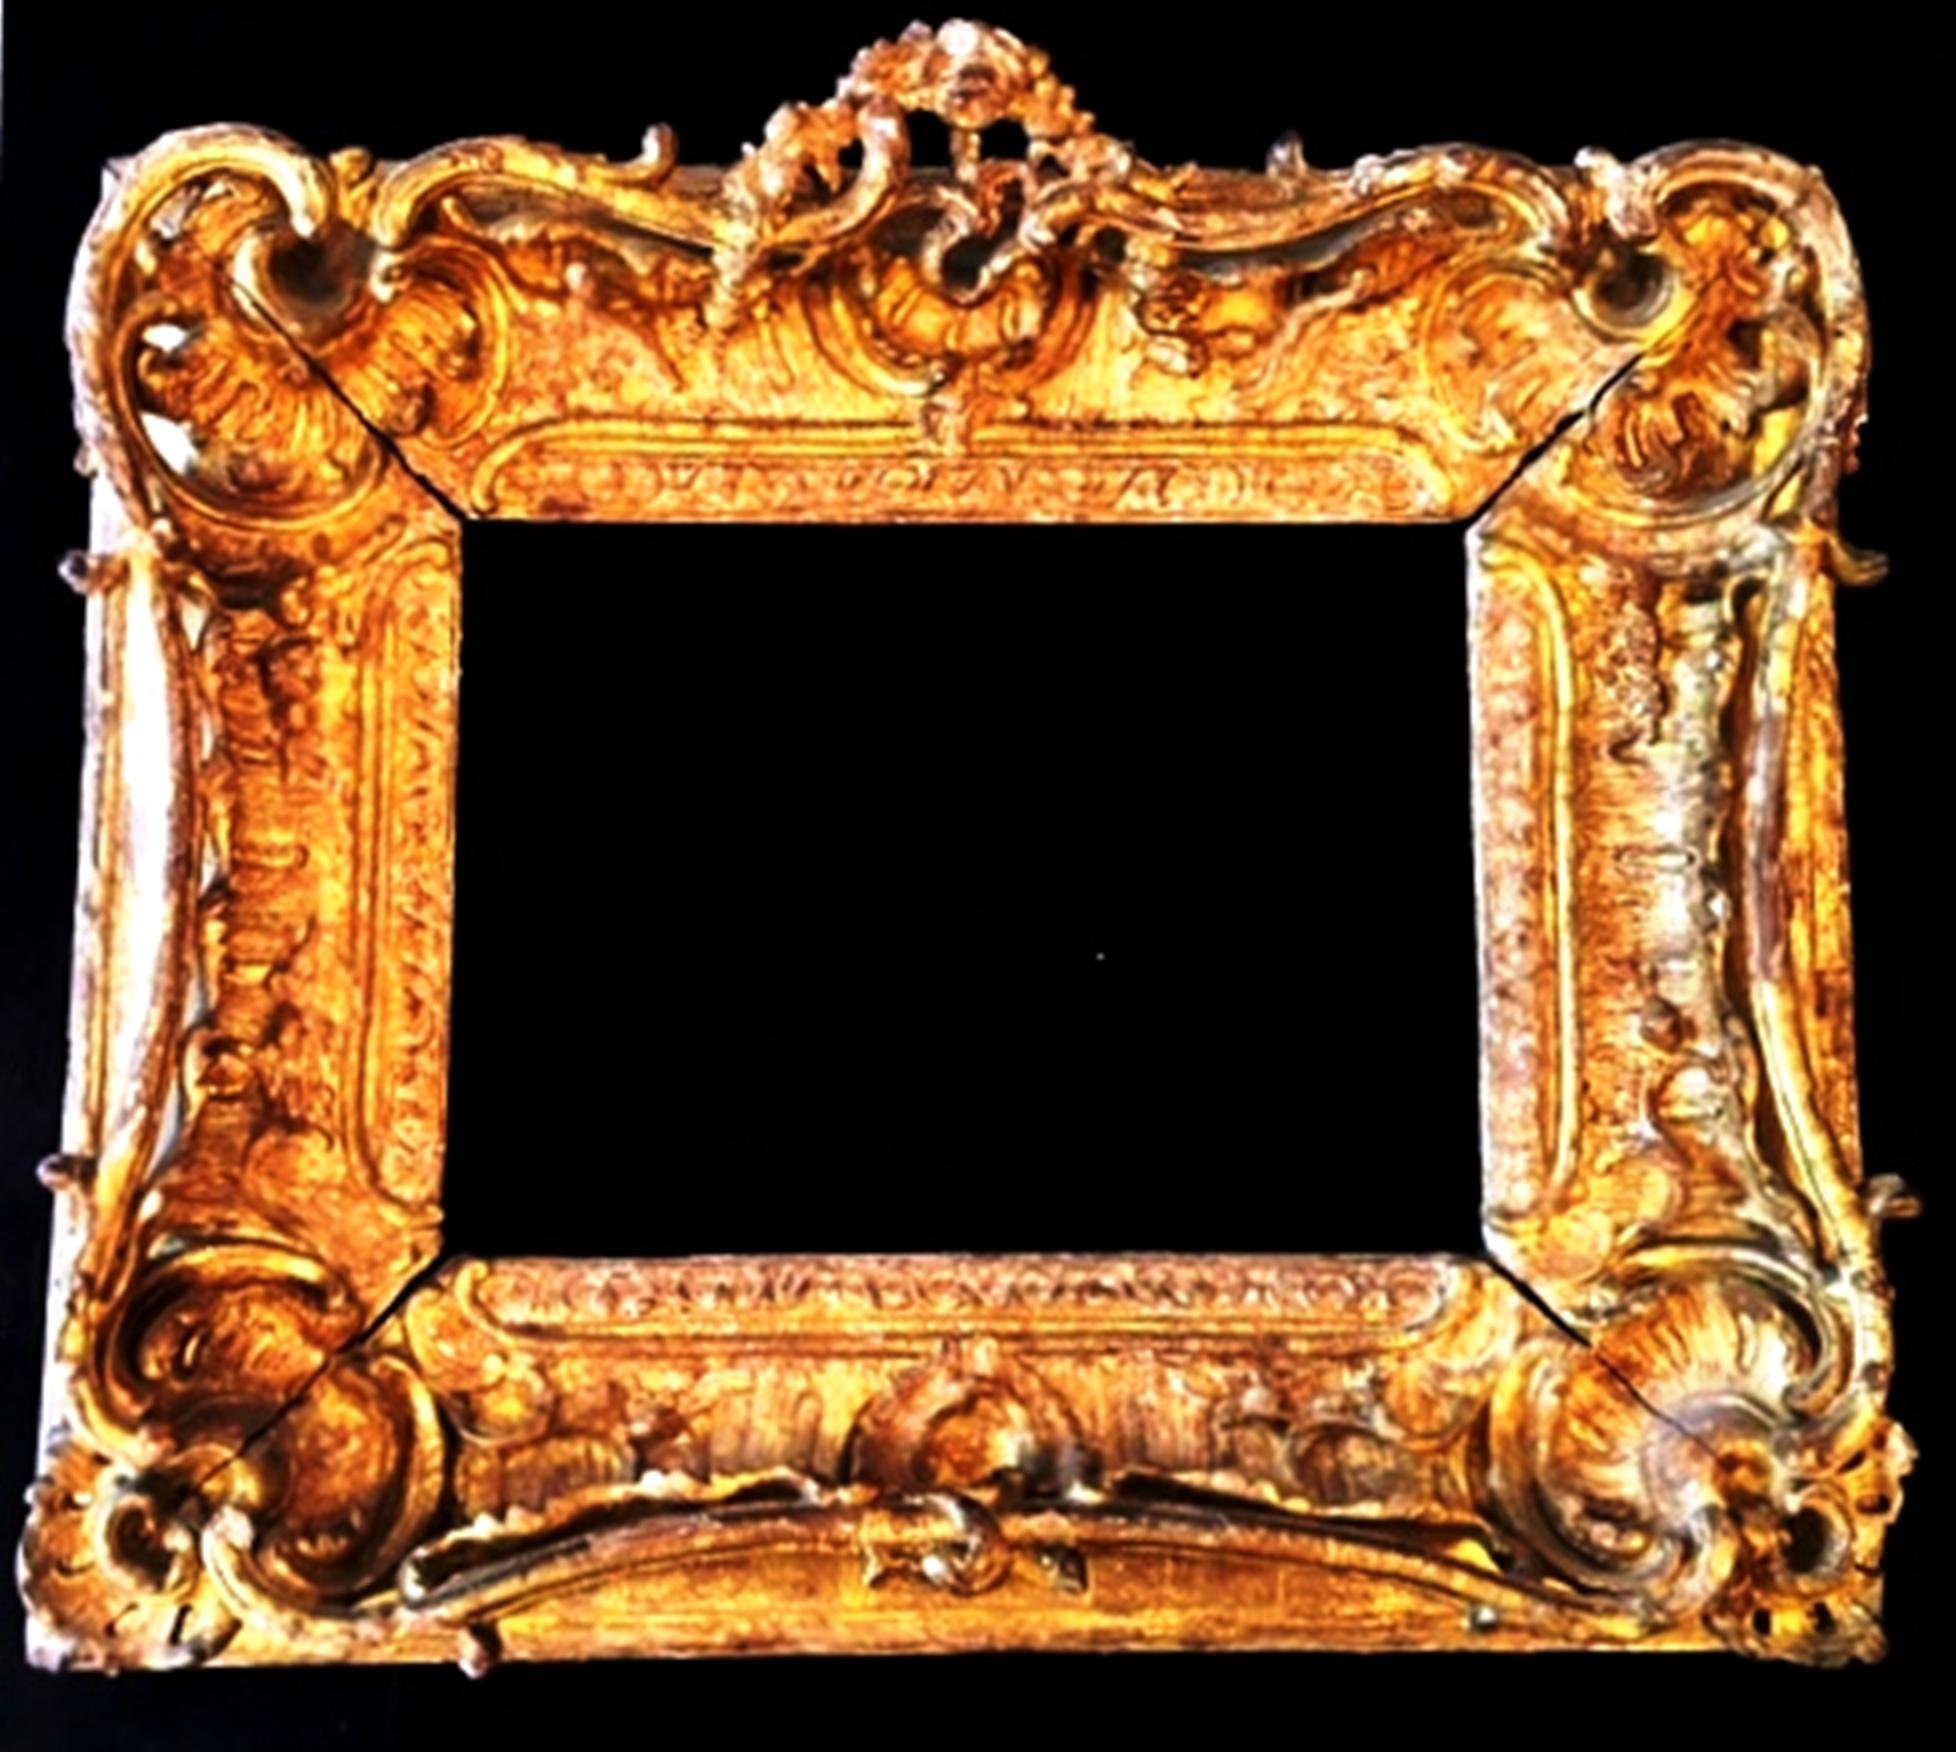 Fabulous Louis XV Period Frame, Mounted as Mirror, Rocaille Decors, France, 1750s
Carved Giltwood
Asymetrical decors of shells, garlands of flowers, etc....
Paris workshop
Sight size is H: 24.5 cm x L: 35 cm
Overall size is : H : 52 cm x L: 60